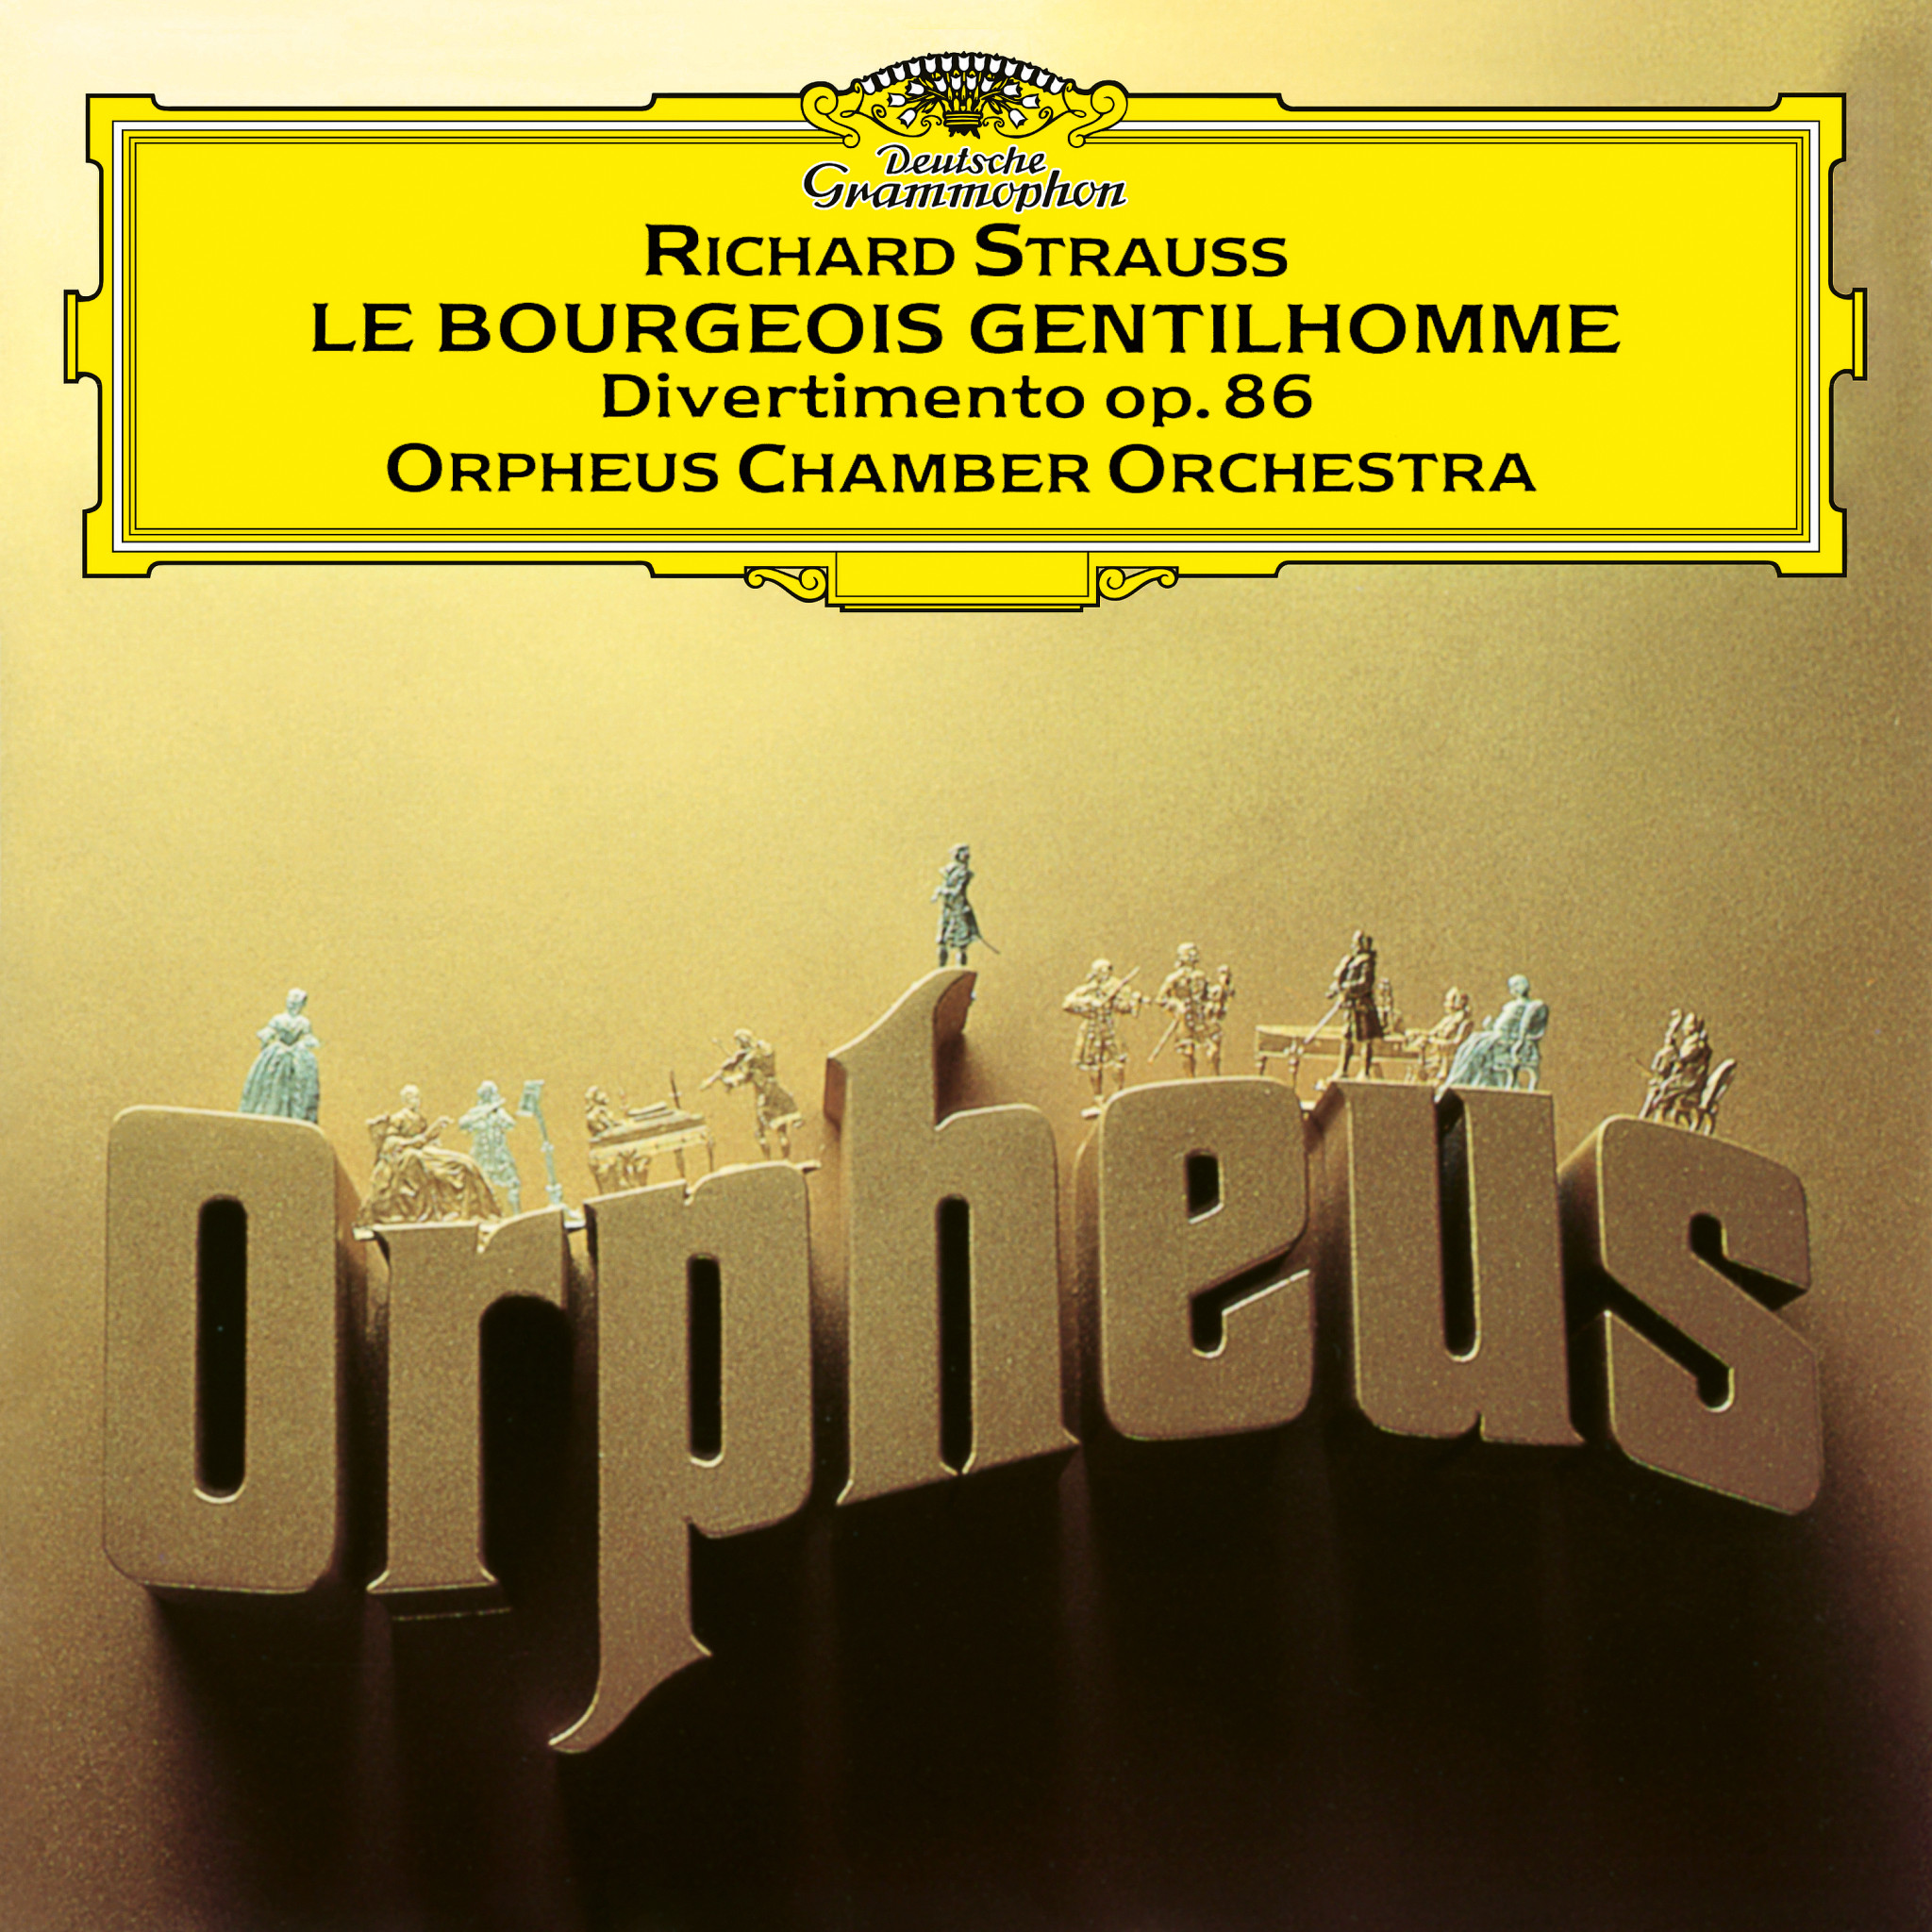 Orpheus Chamber Orchestra - R. Strauss: Divertimento, Op. 86; Le bourgeois gentilhomme - Orchestral Suite, Op. 60 eAlbum Cover